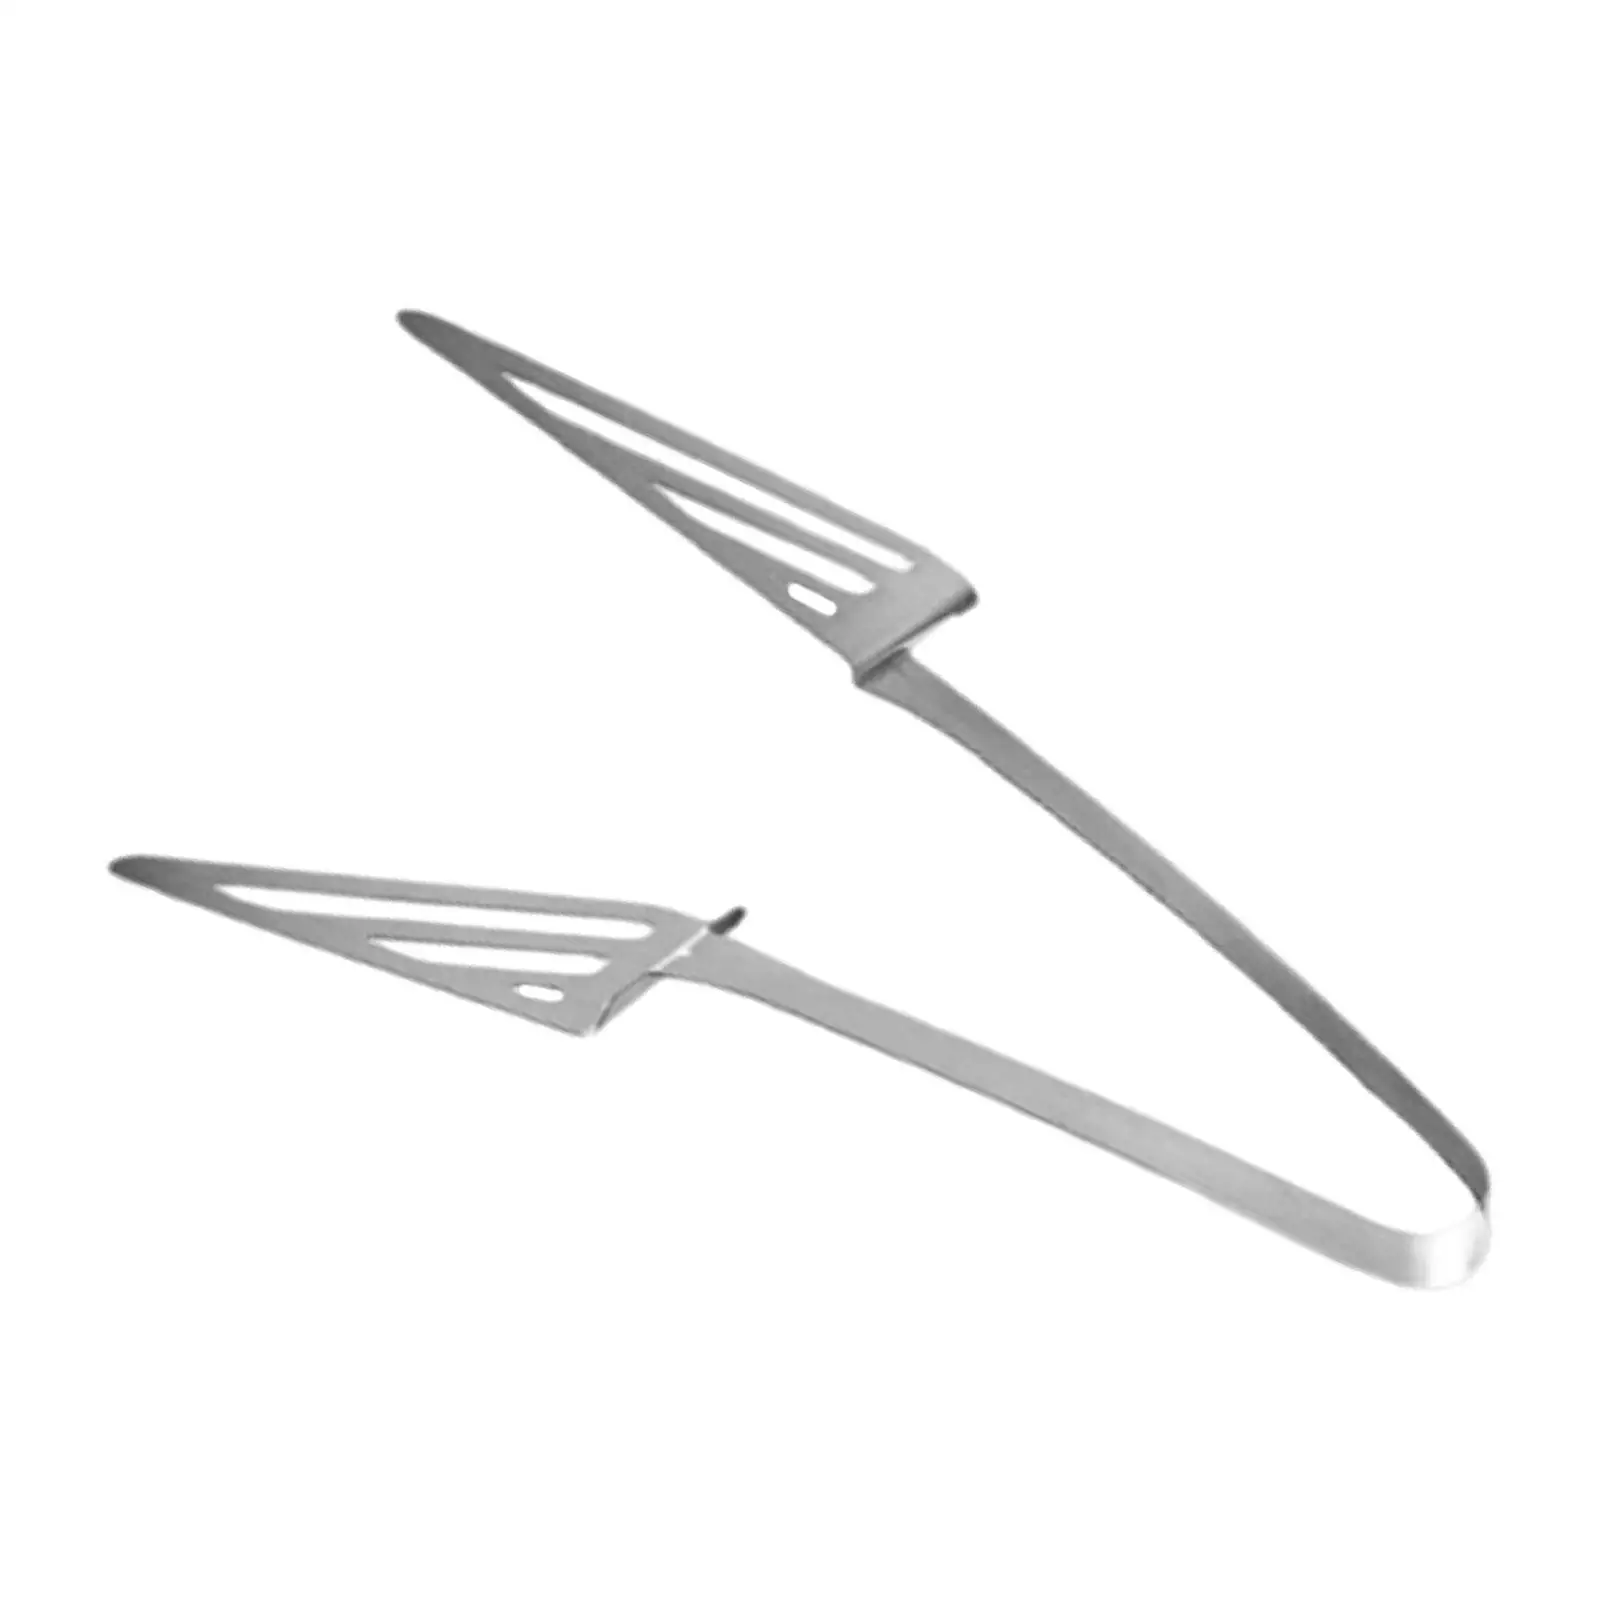 Kitchen Tongs Stainless Steel Pastry Serving Tongs for BBQ Picnic Party